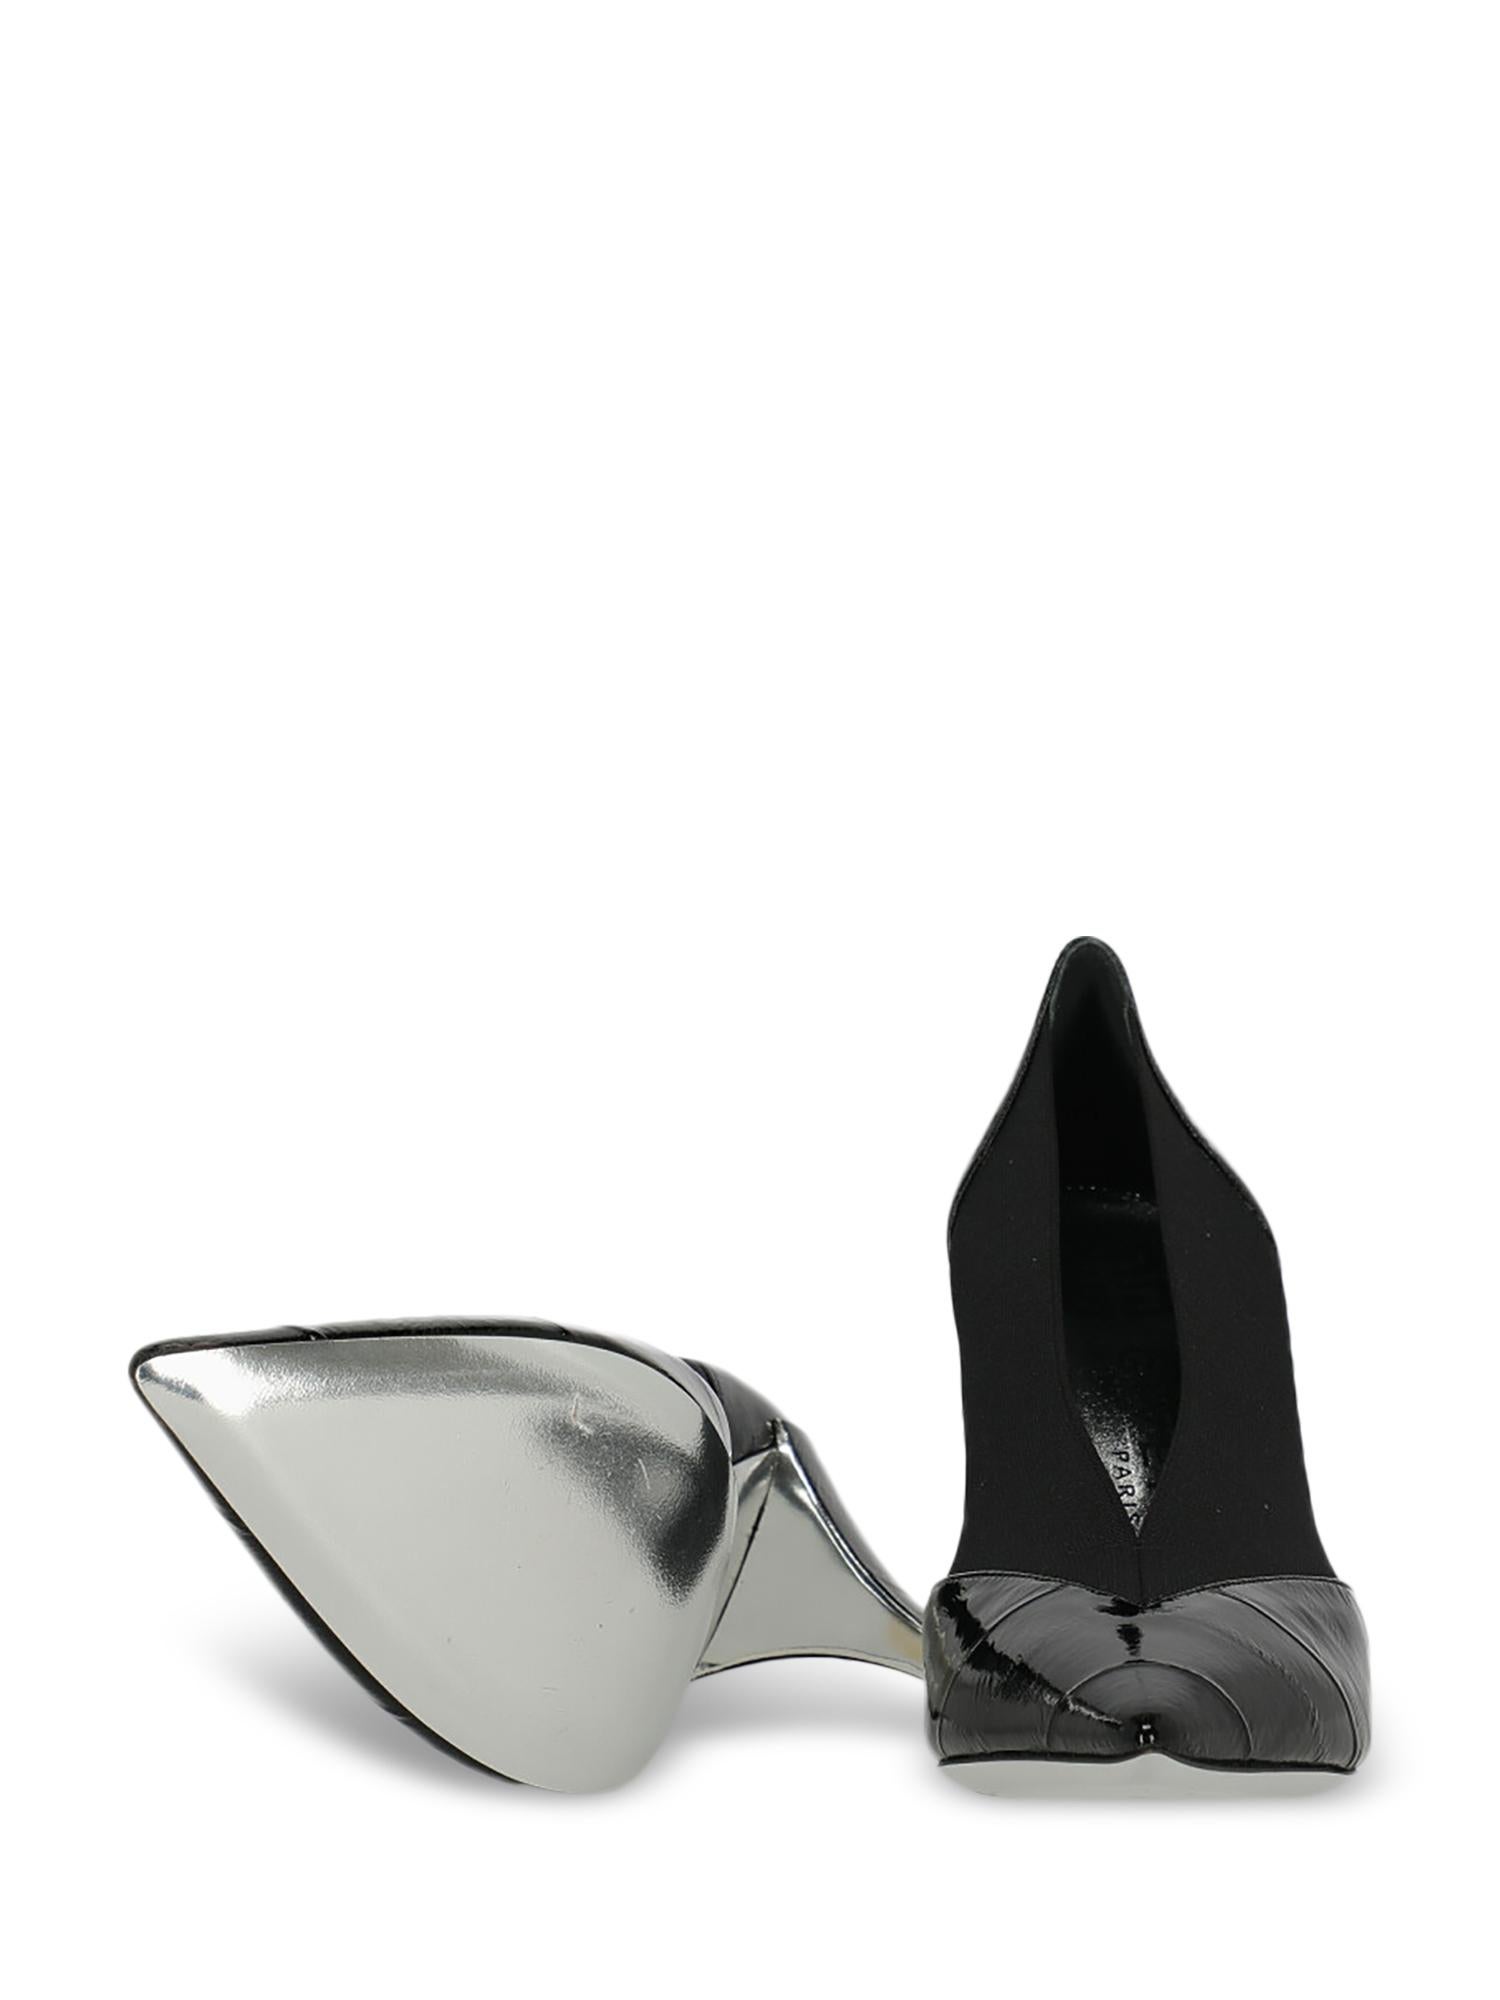 Givenchy Woman Pumps Black Leather IT 38.5 For Sale 1